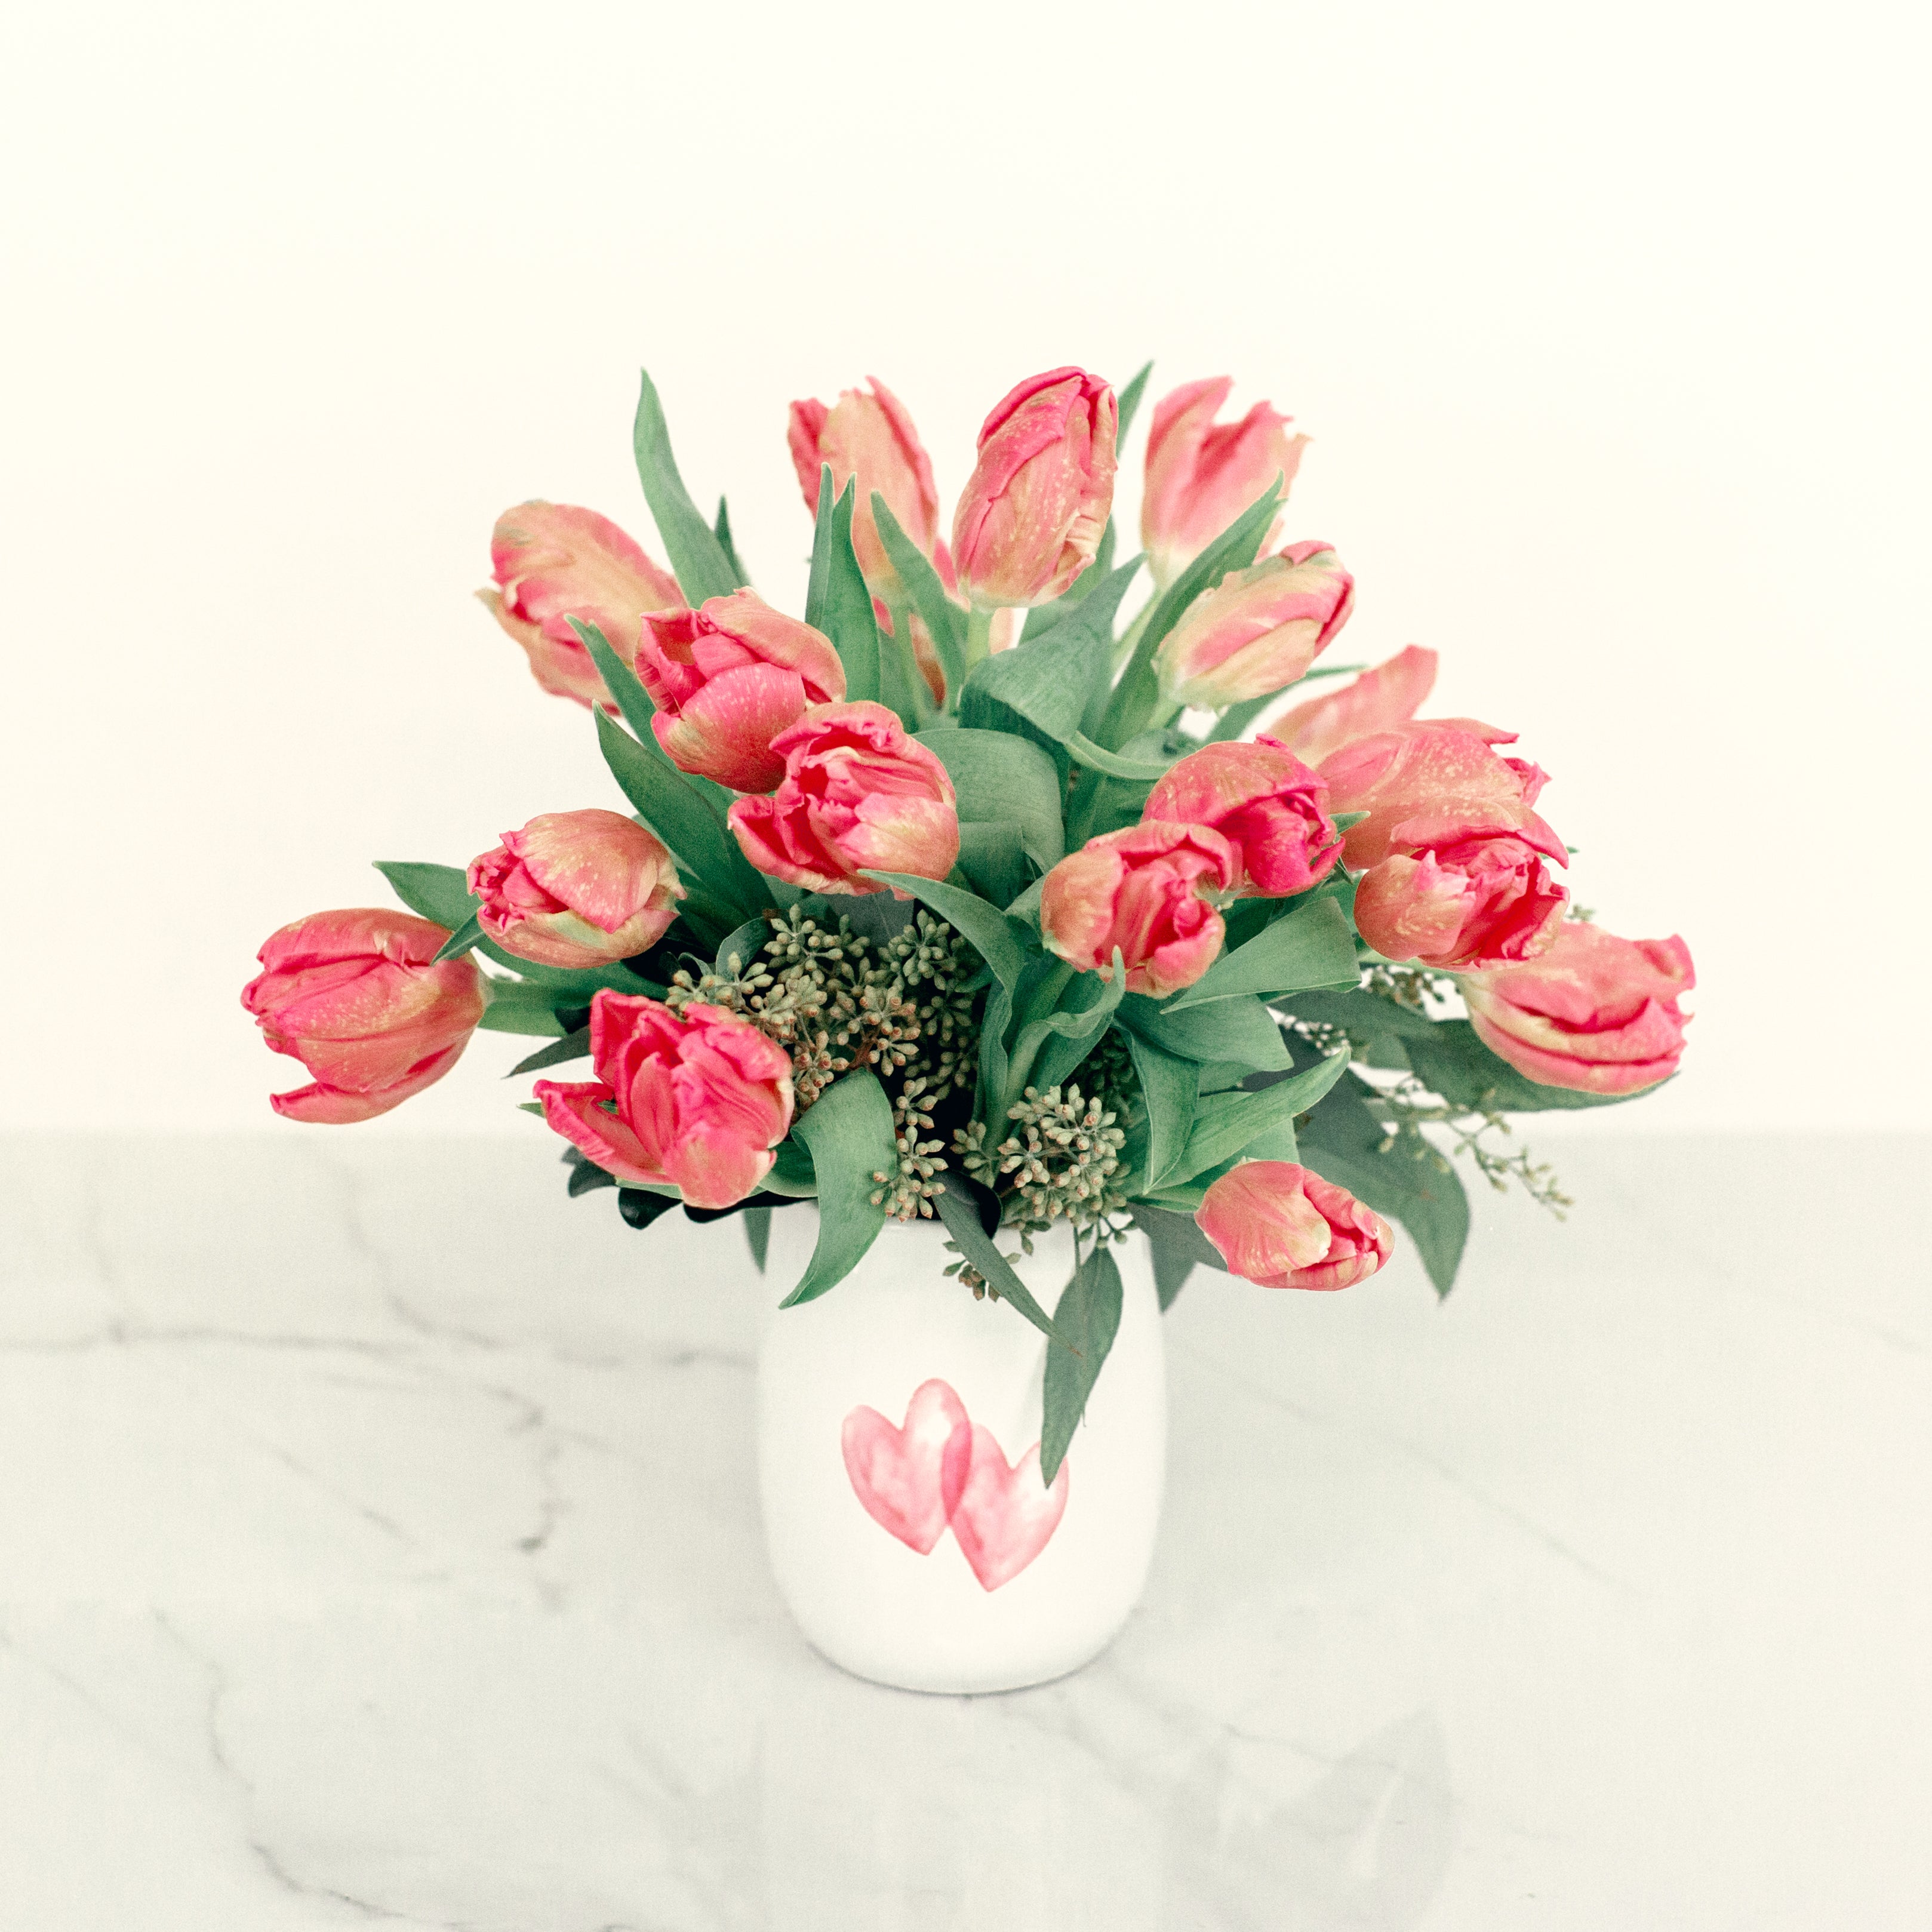 A Foolproof, Flower Arranging Trick - How to Decorate